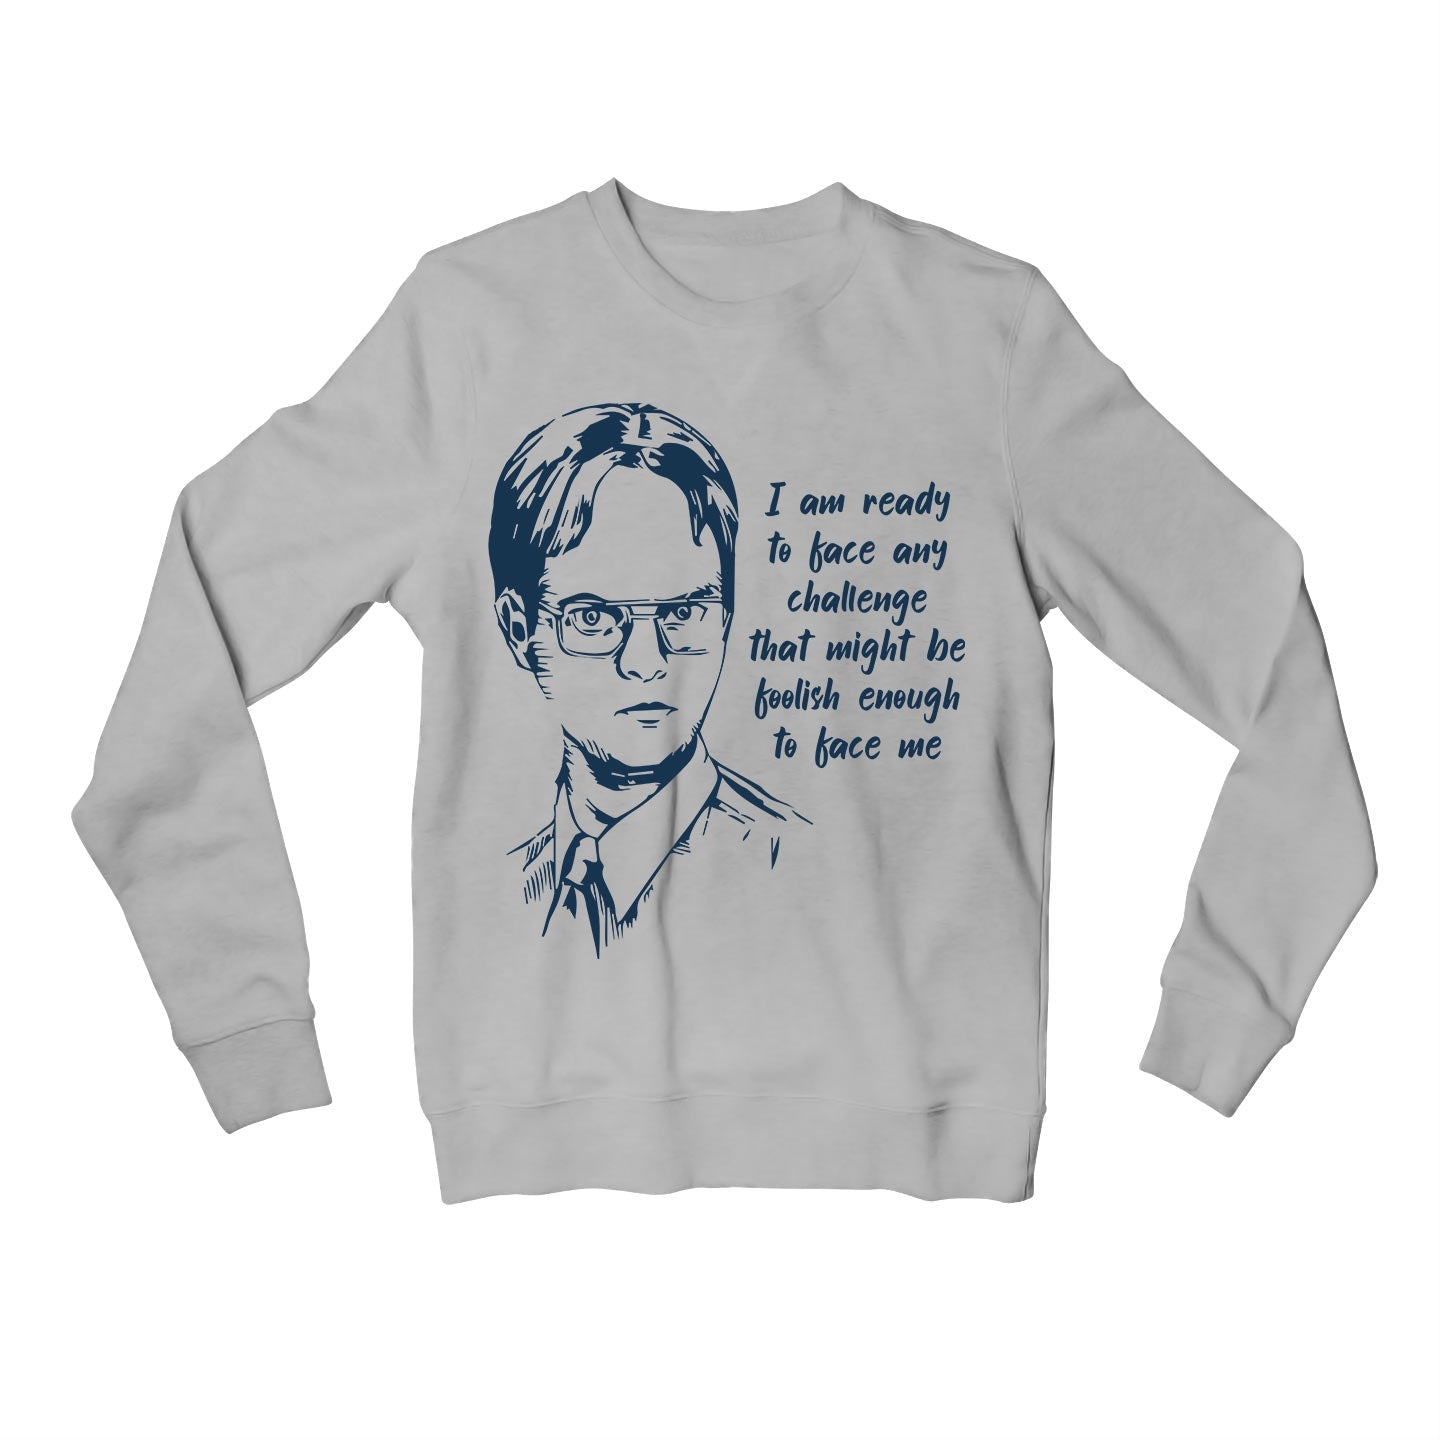 the office dwight sweatshirt upper winterwear tv & movies buy online india the banyan tee tbt men women girls boys unisex gray - i am ready to face any challenge